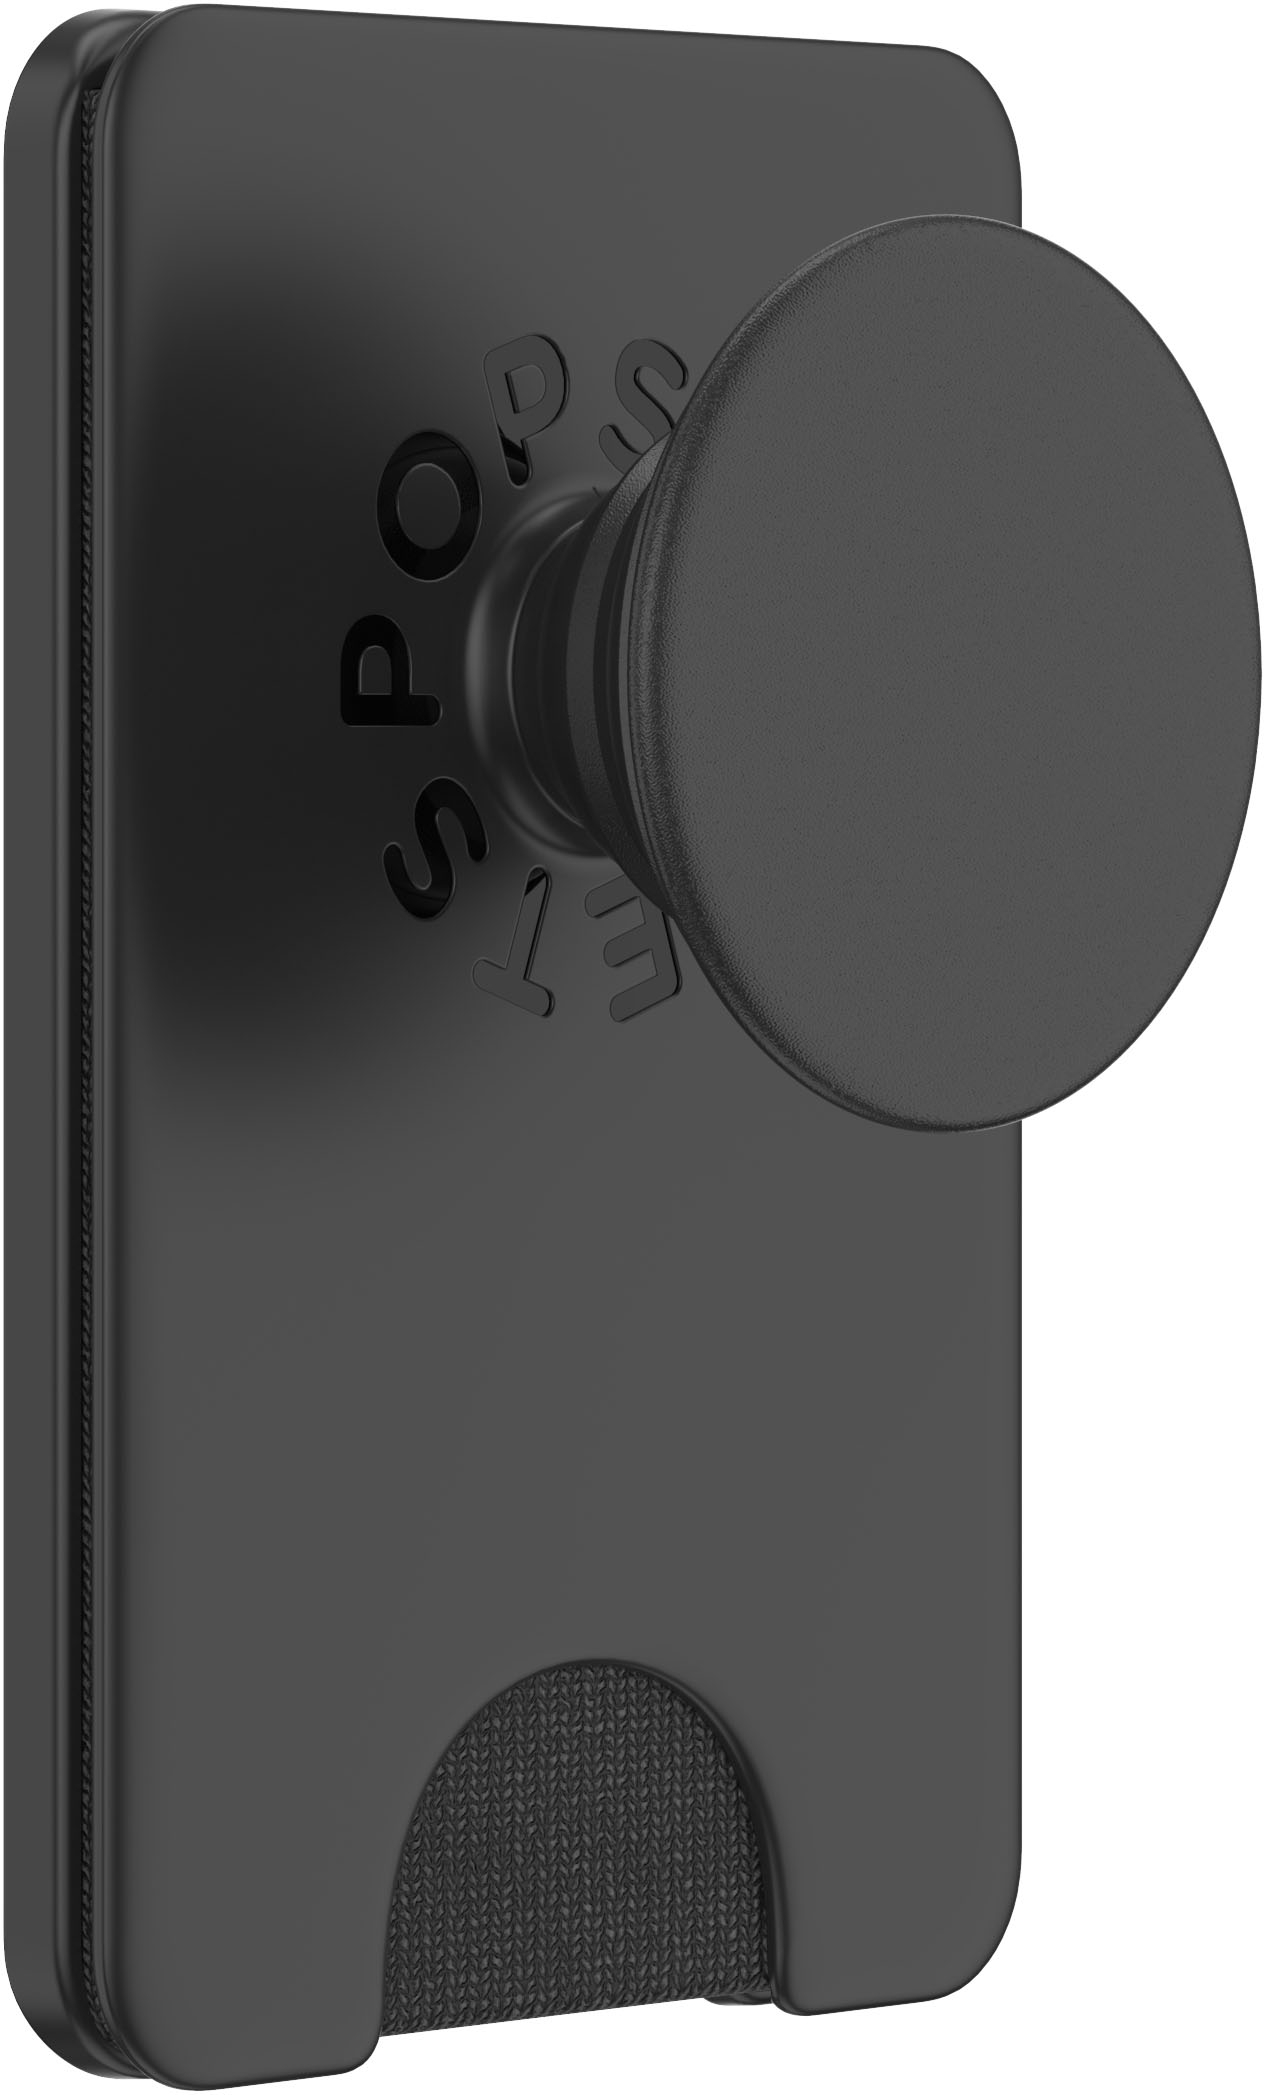 PopSocket Universal 2-in-1 Stand & Grip - Black